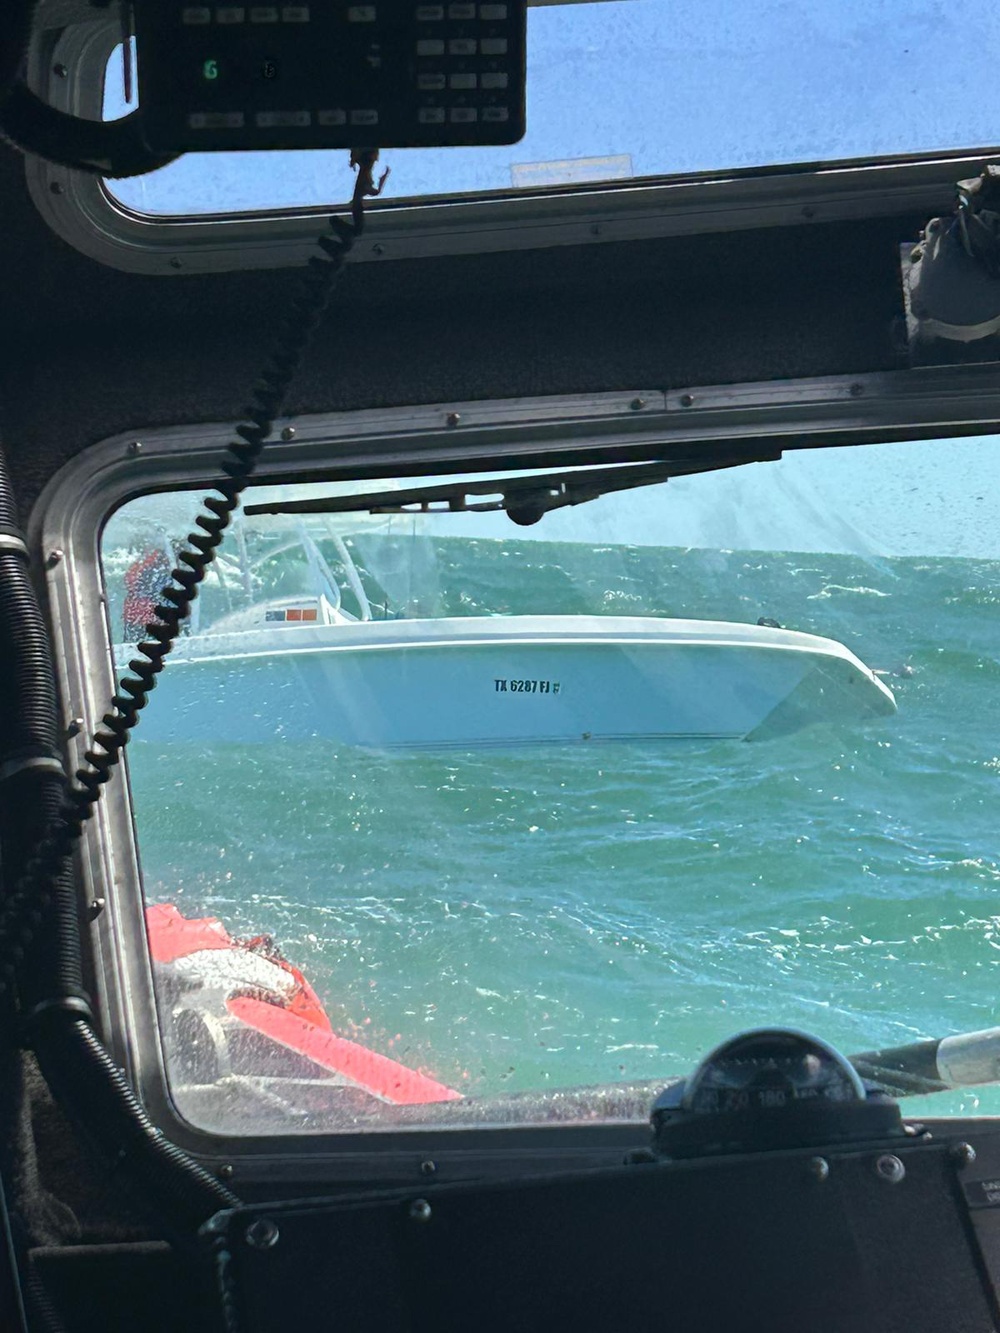 DVIDS Images Coast Guard assists 3 overdue boaters offshore South